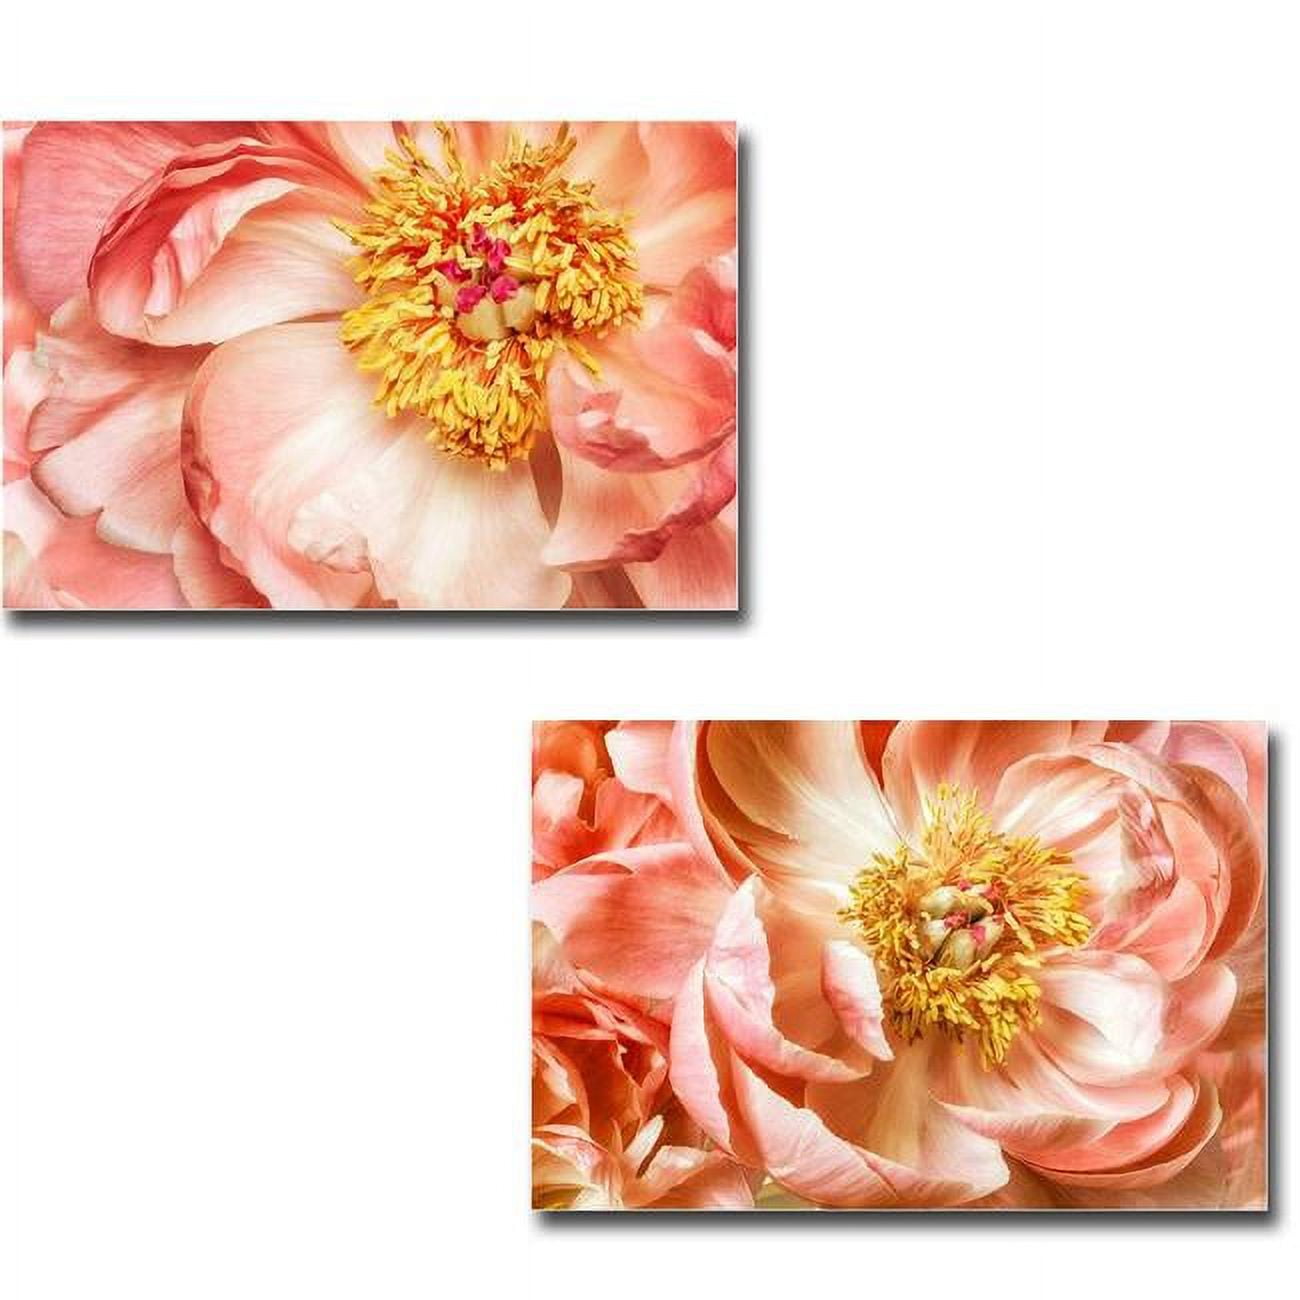 2436y749eg Peony One & Peony Two By Dianne Poinski Gallery-wrapped Canvas Giclee Art Set - Ready To Hang, 24 X 36 X 1.5 In.